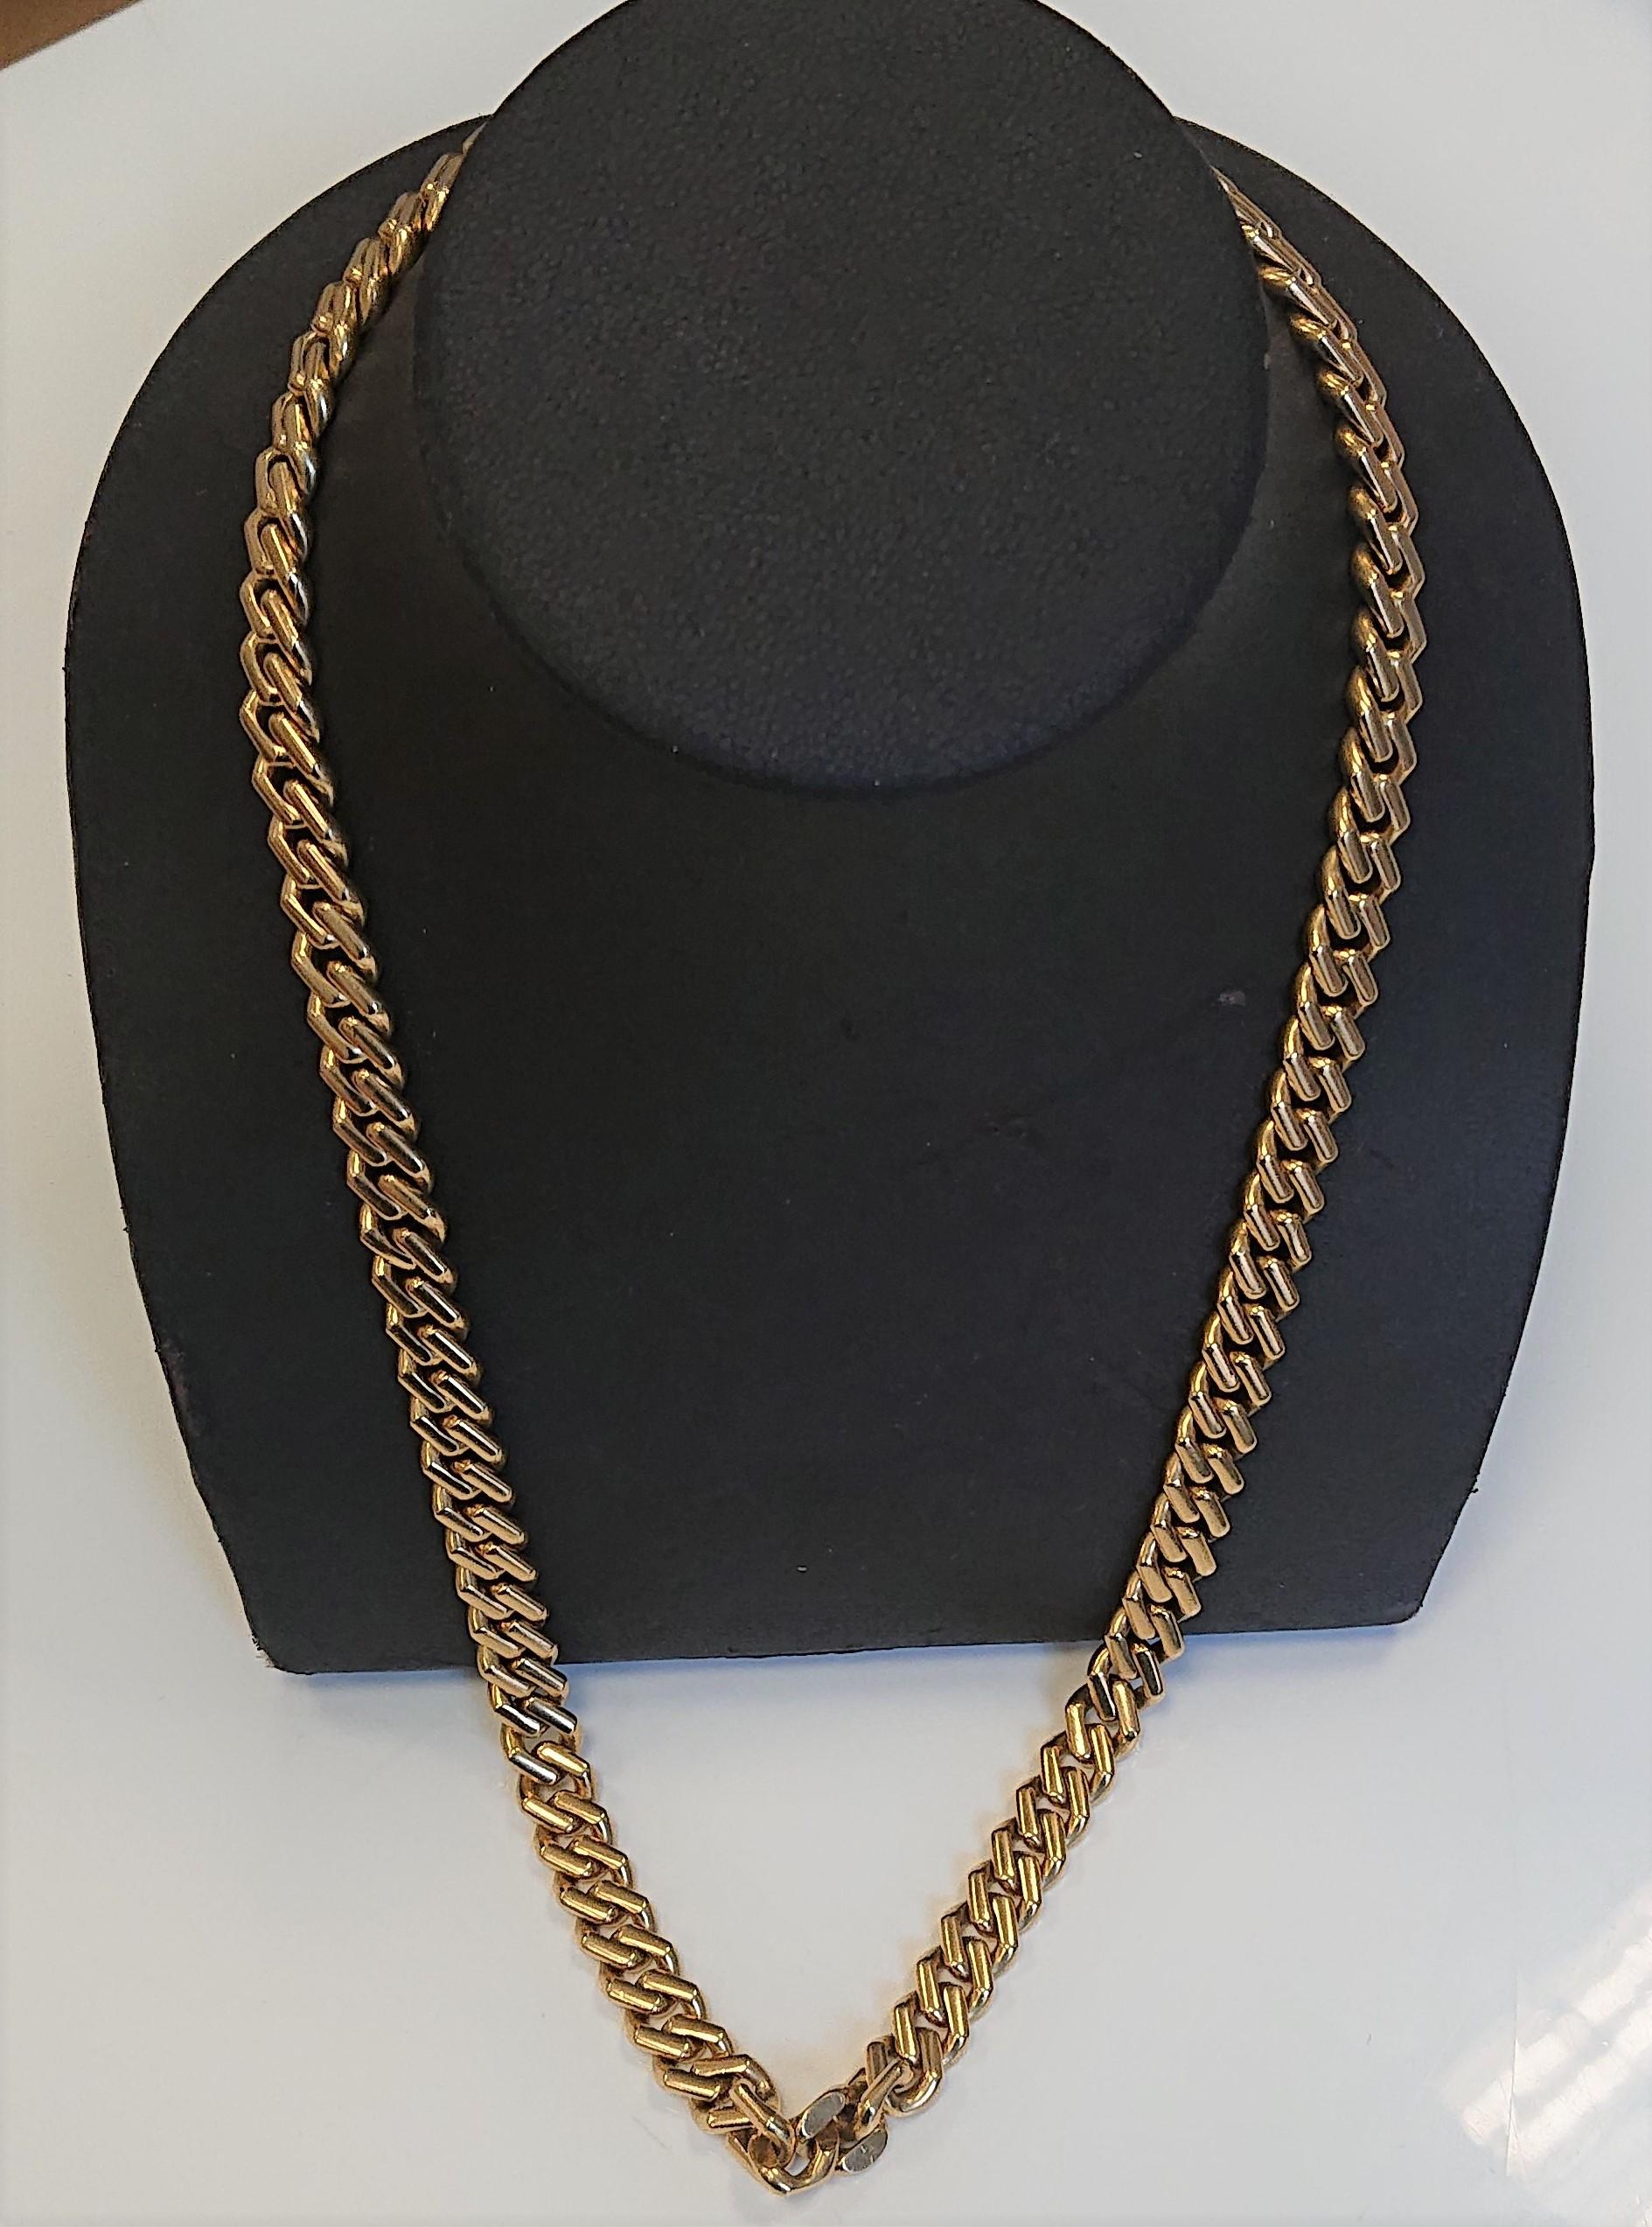 Bulgari 18 Carat Yellow Gold Heavy Link Chain Necklace. 1980s. The gold necklace signed 